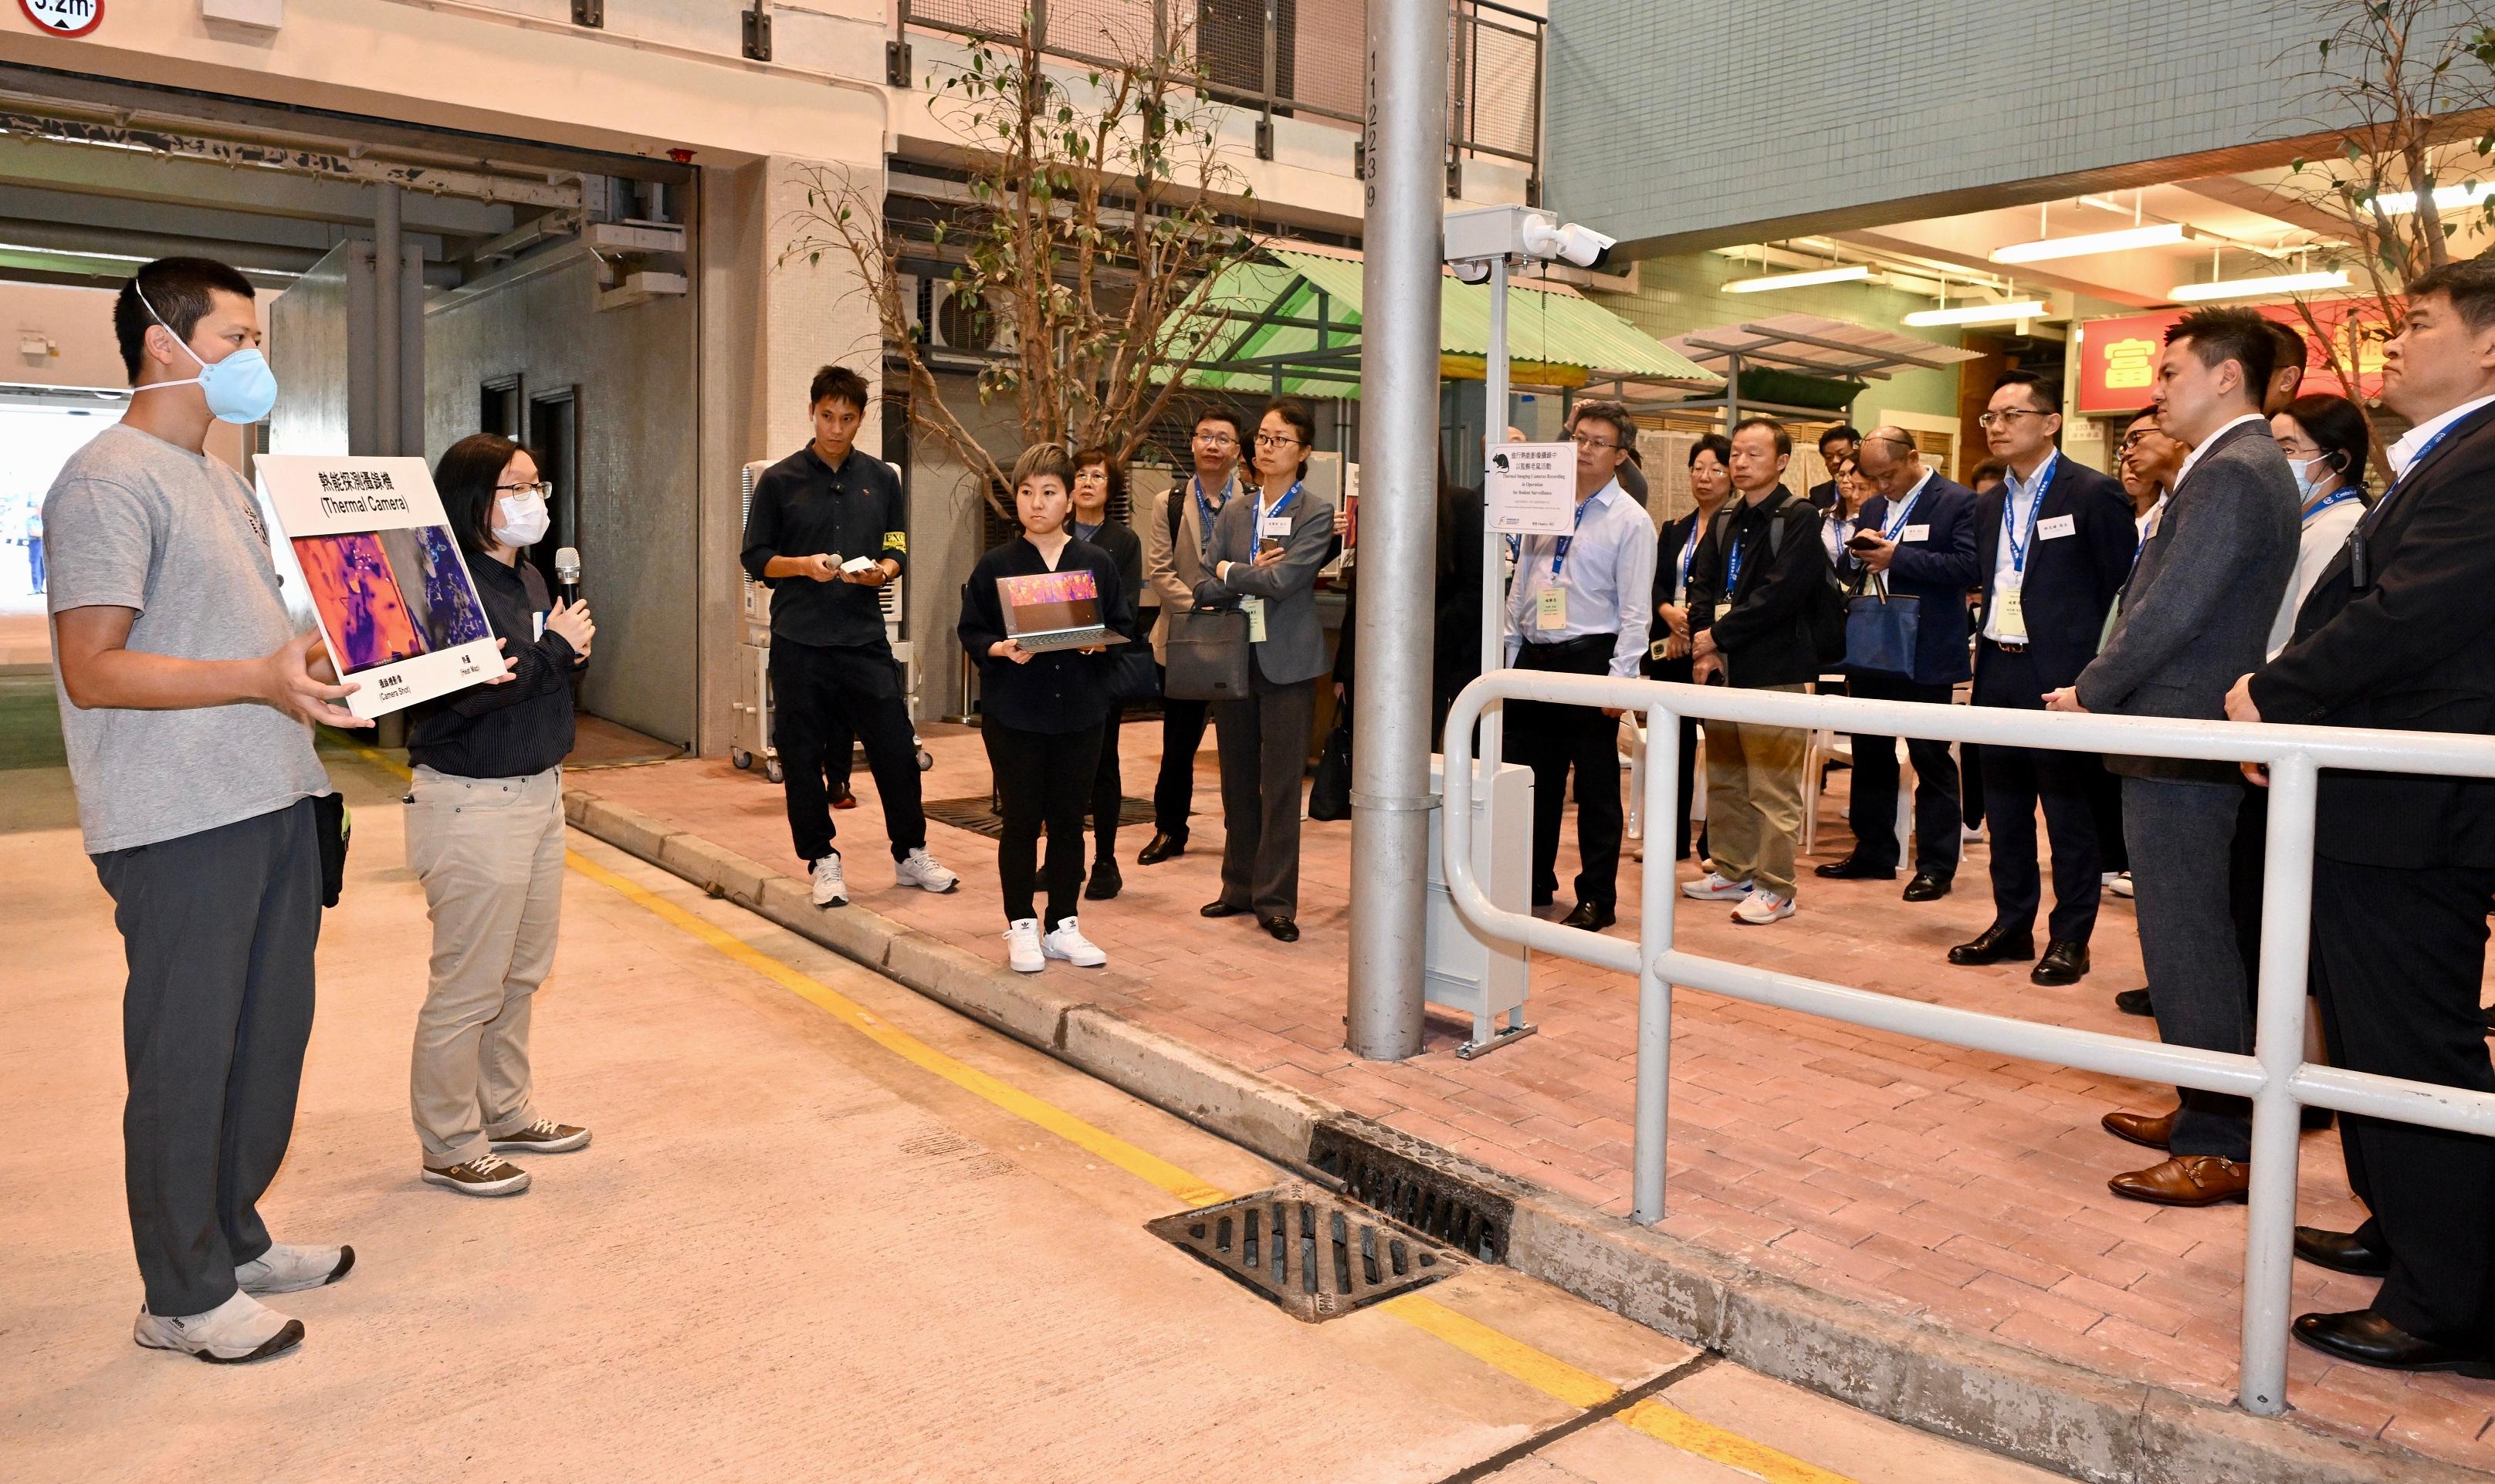 The Centre for Health Protection of the Department of Health, in collaboration with other government departments, today (November 27) held a public health exercise code-named "Prehnite" to test their preparedness in handling an imported case of plague. Photo shows officers of the Food and Environmental Hygiene Department explaining the use of thermal cameras in the prevention and control of rodents.